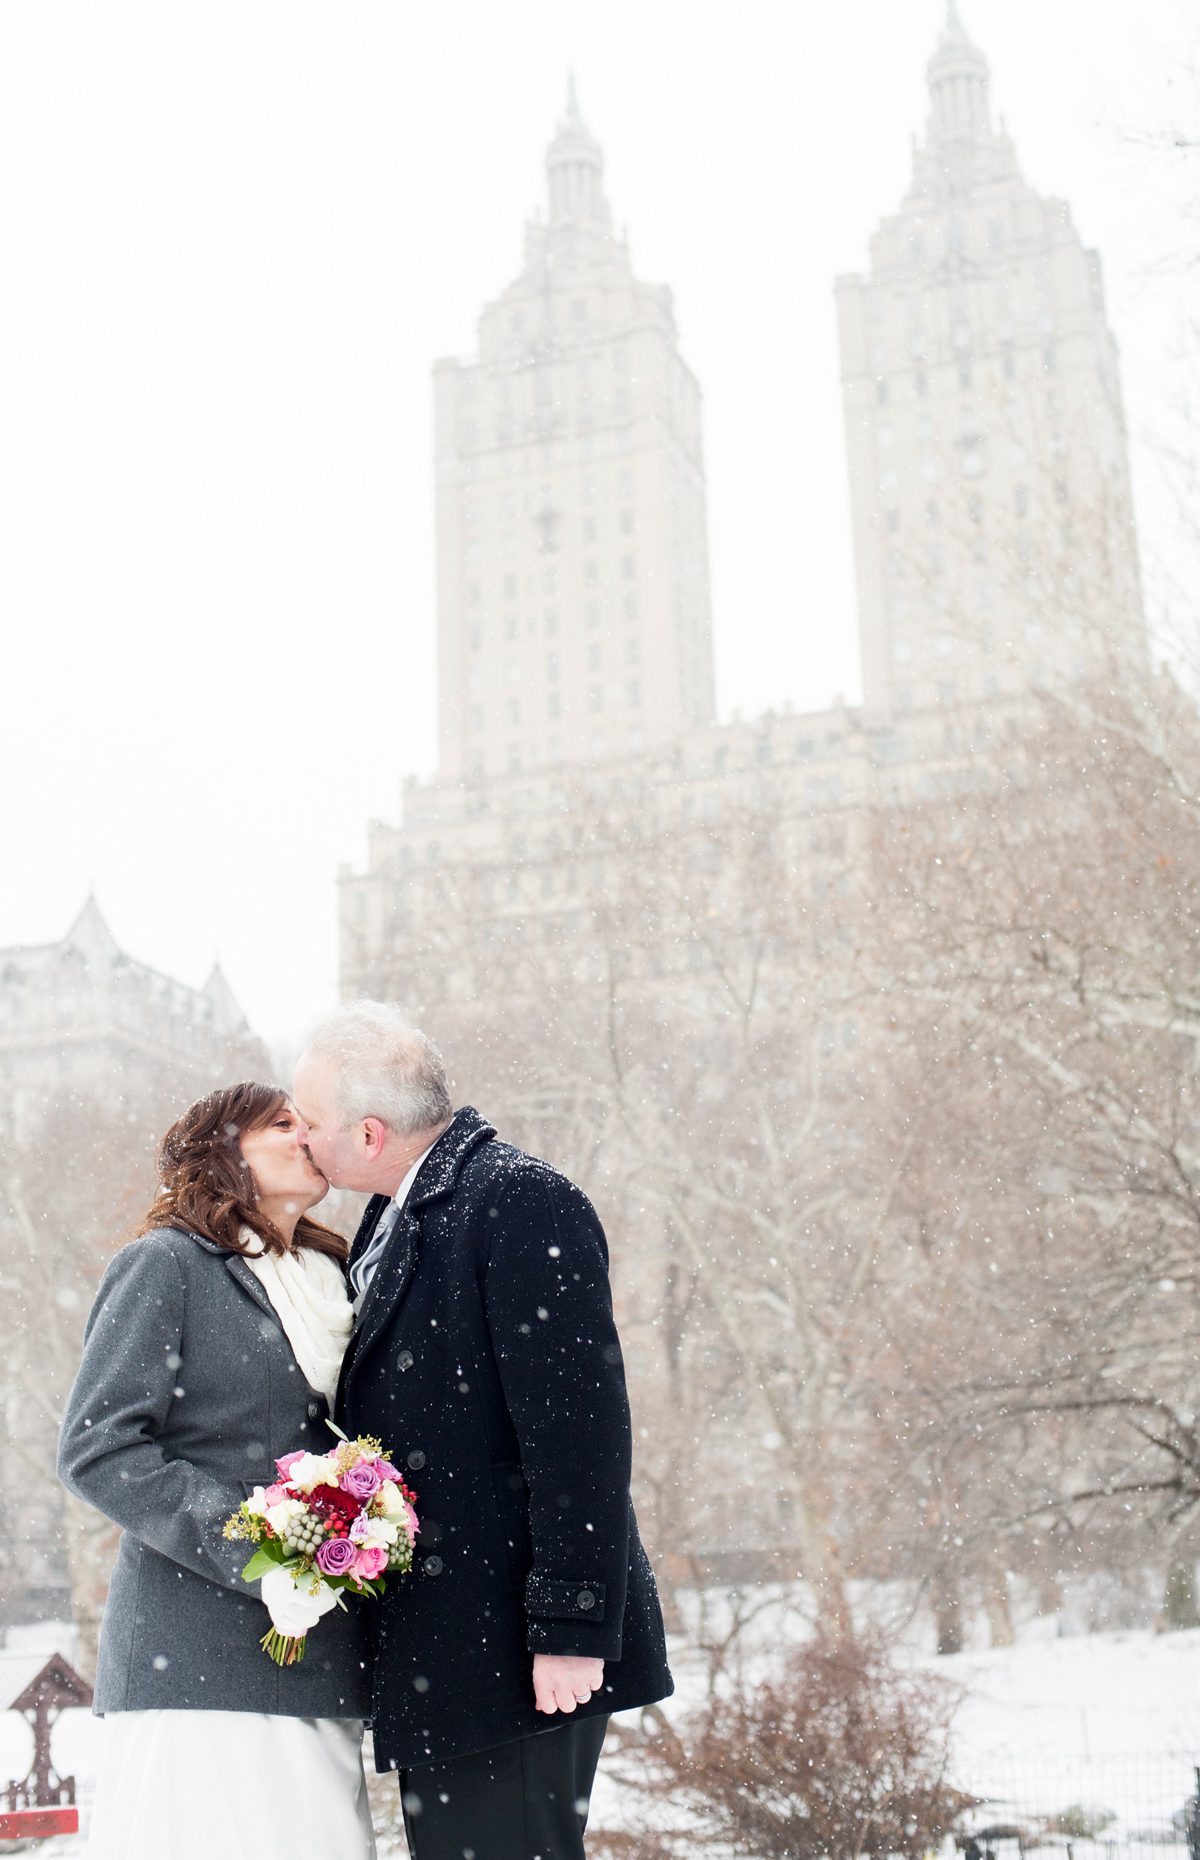 Elope on Valentines in NYC